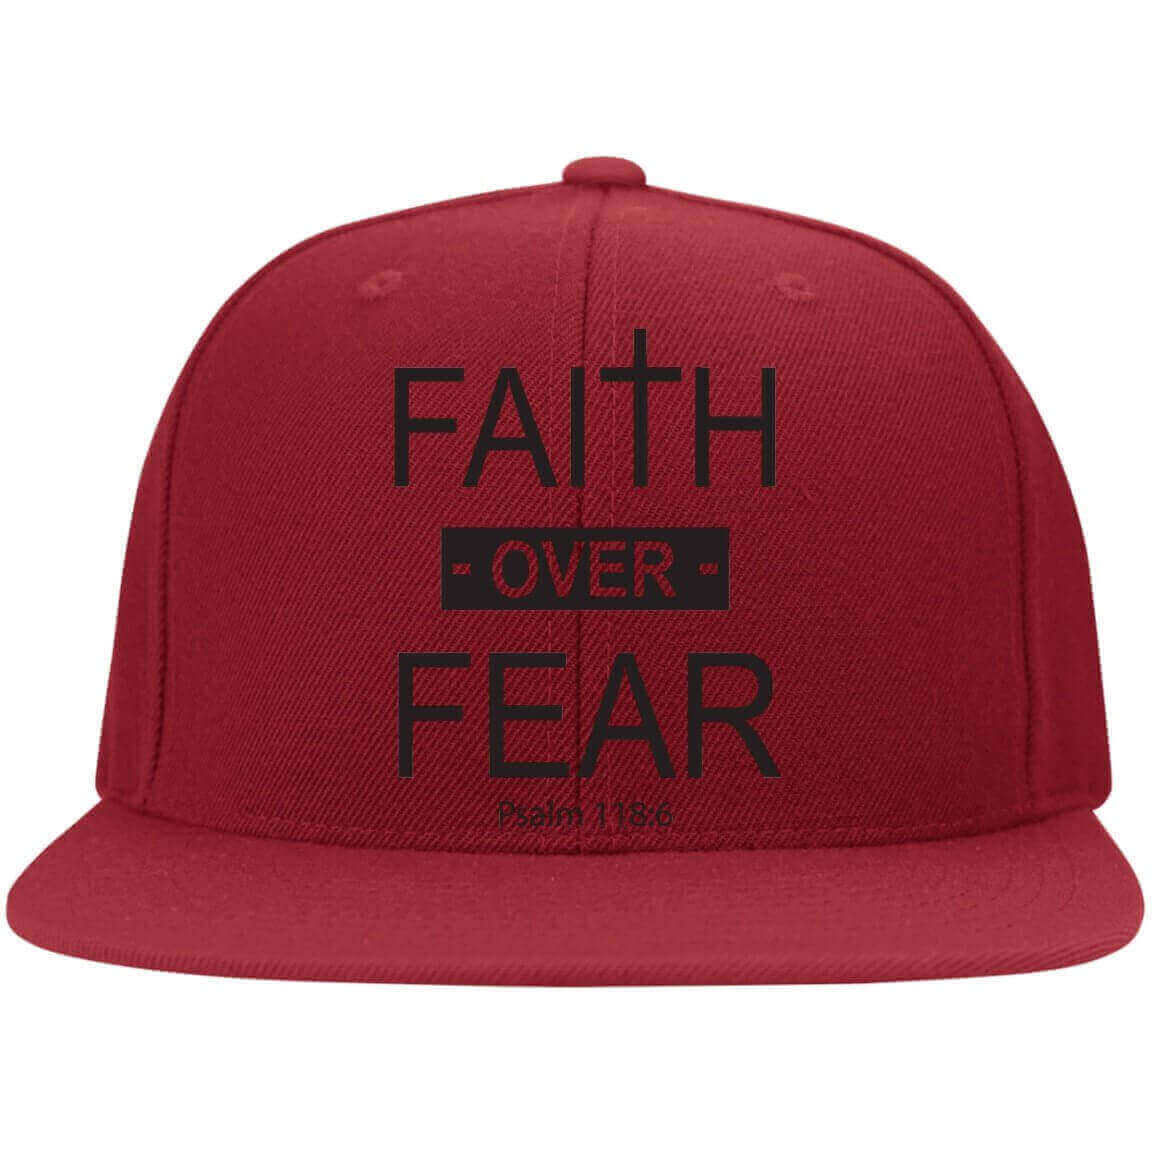 Faith Over Fear Cross Embroidered Fitted Cap